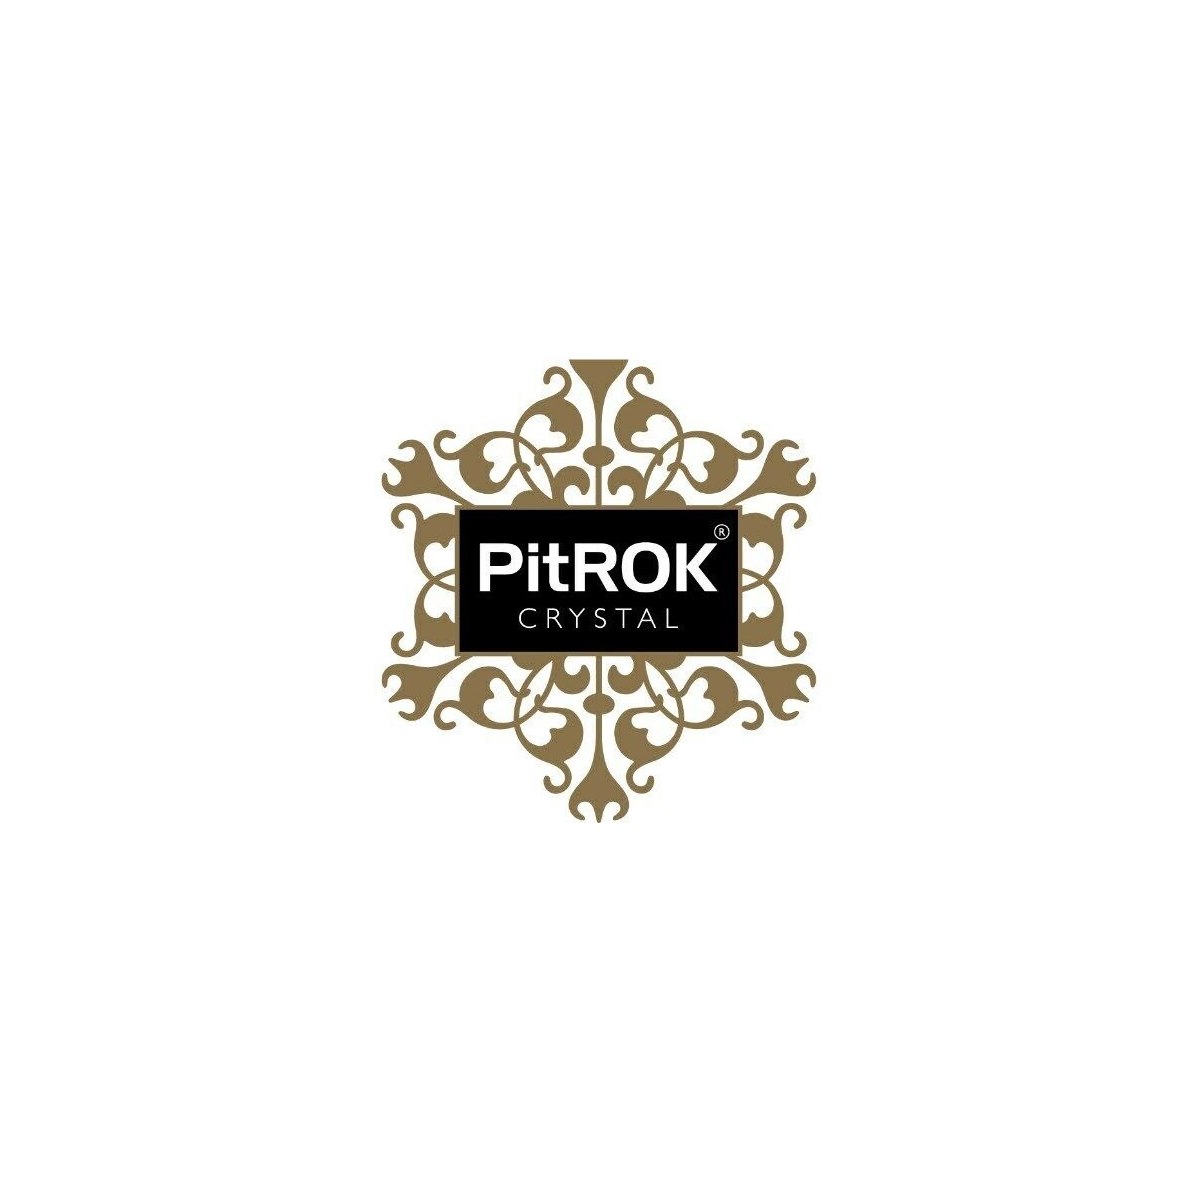 Where to Buy Pitrok Products